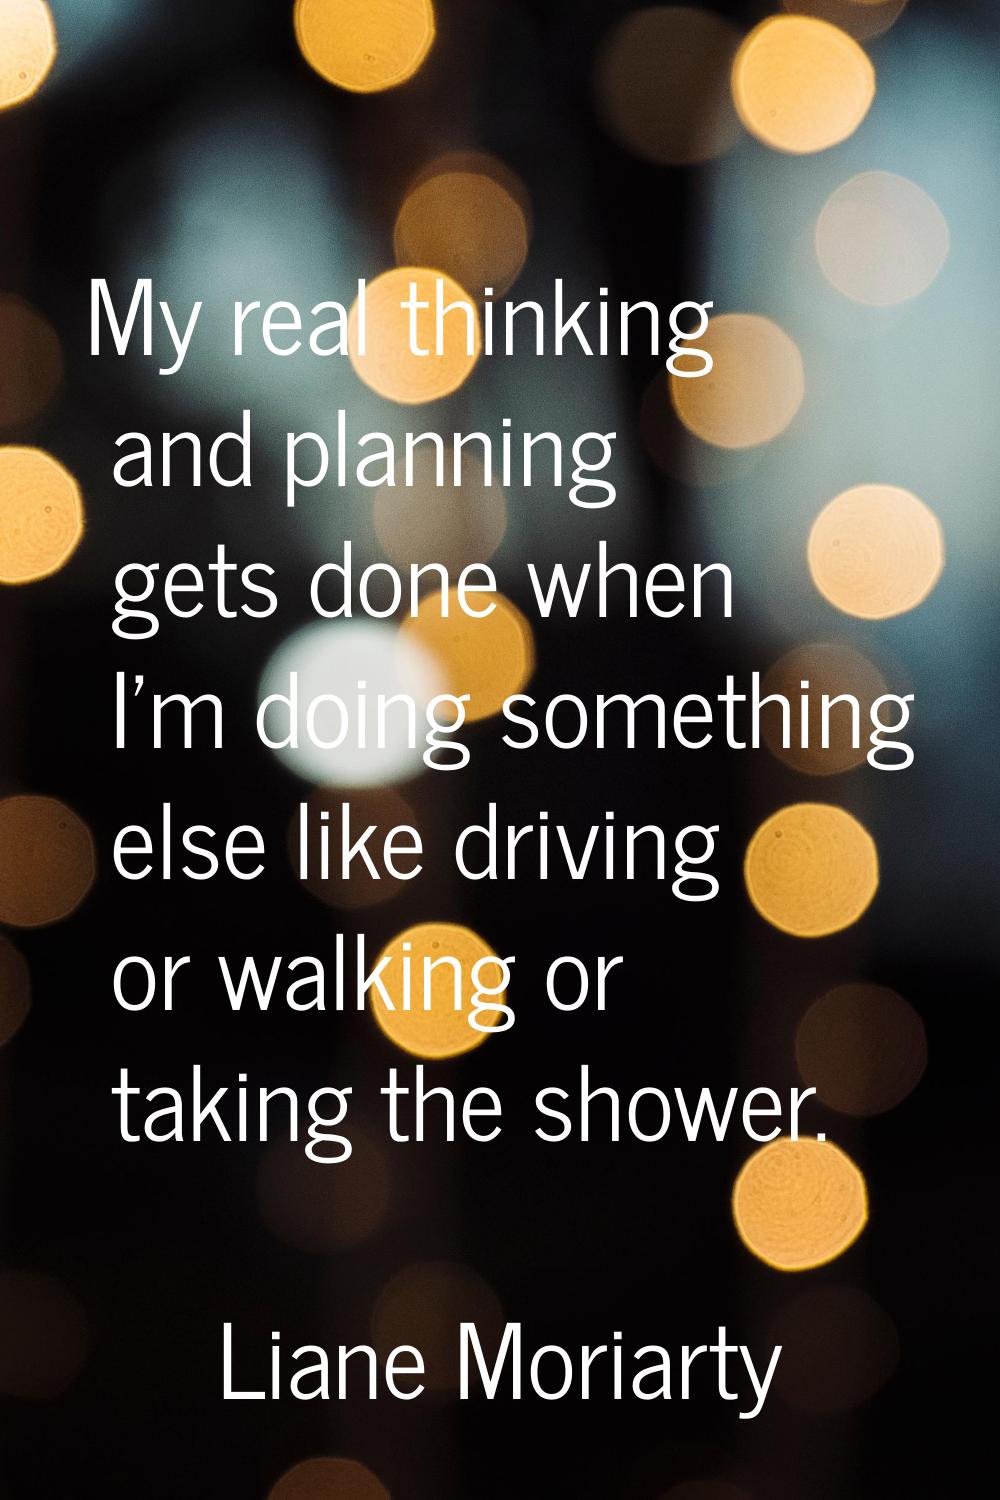 My real thinking and planning gets done when I'm doing something else like driving or walking or ta